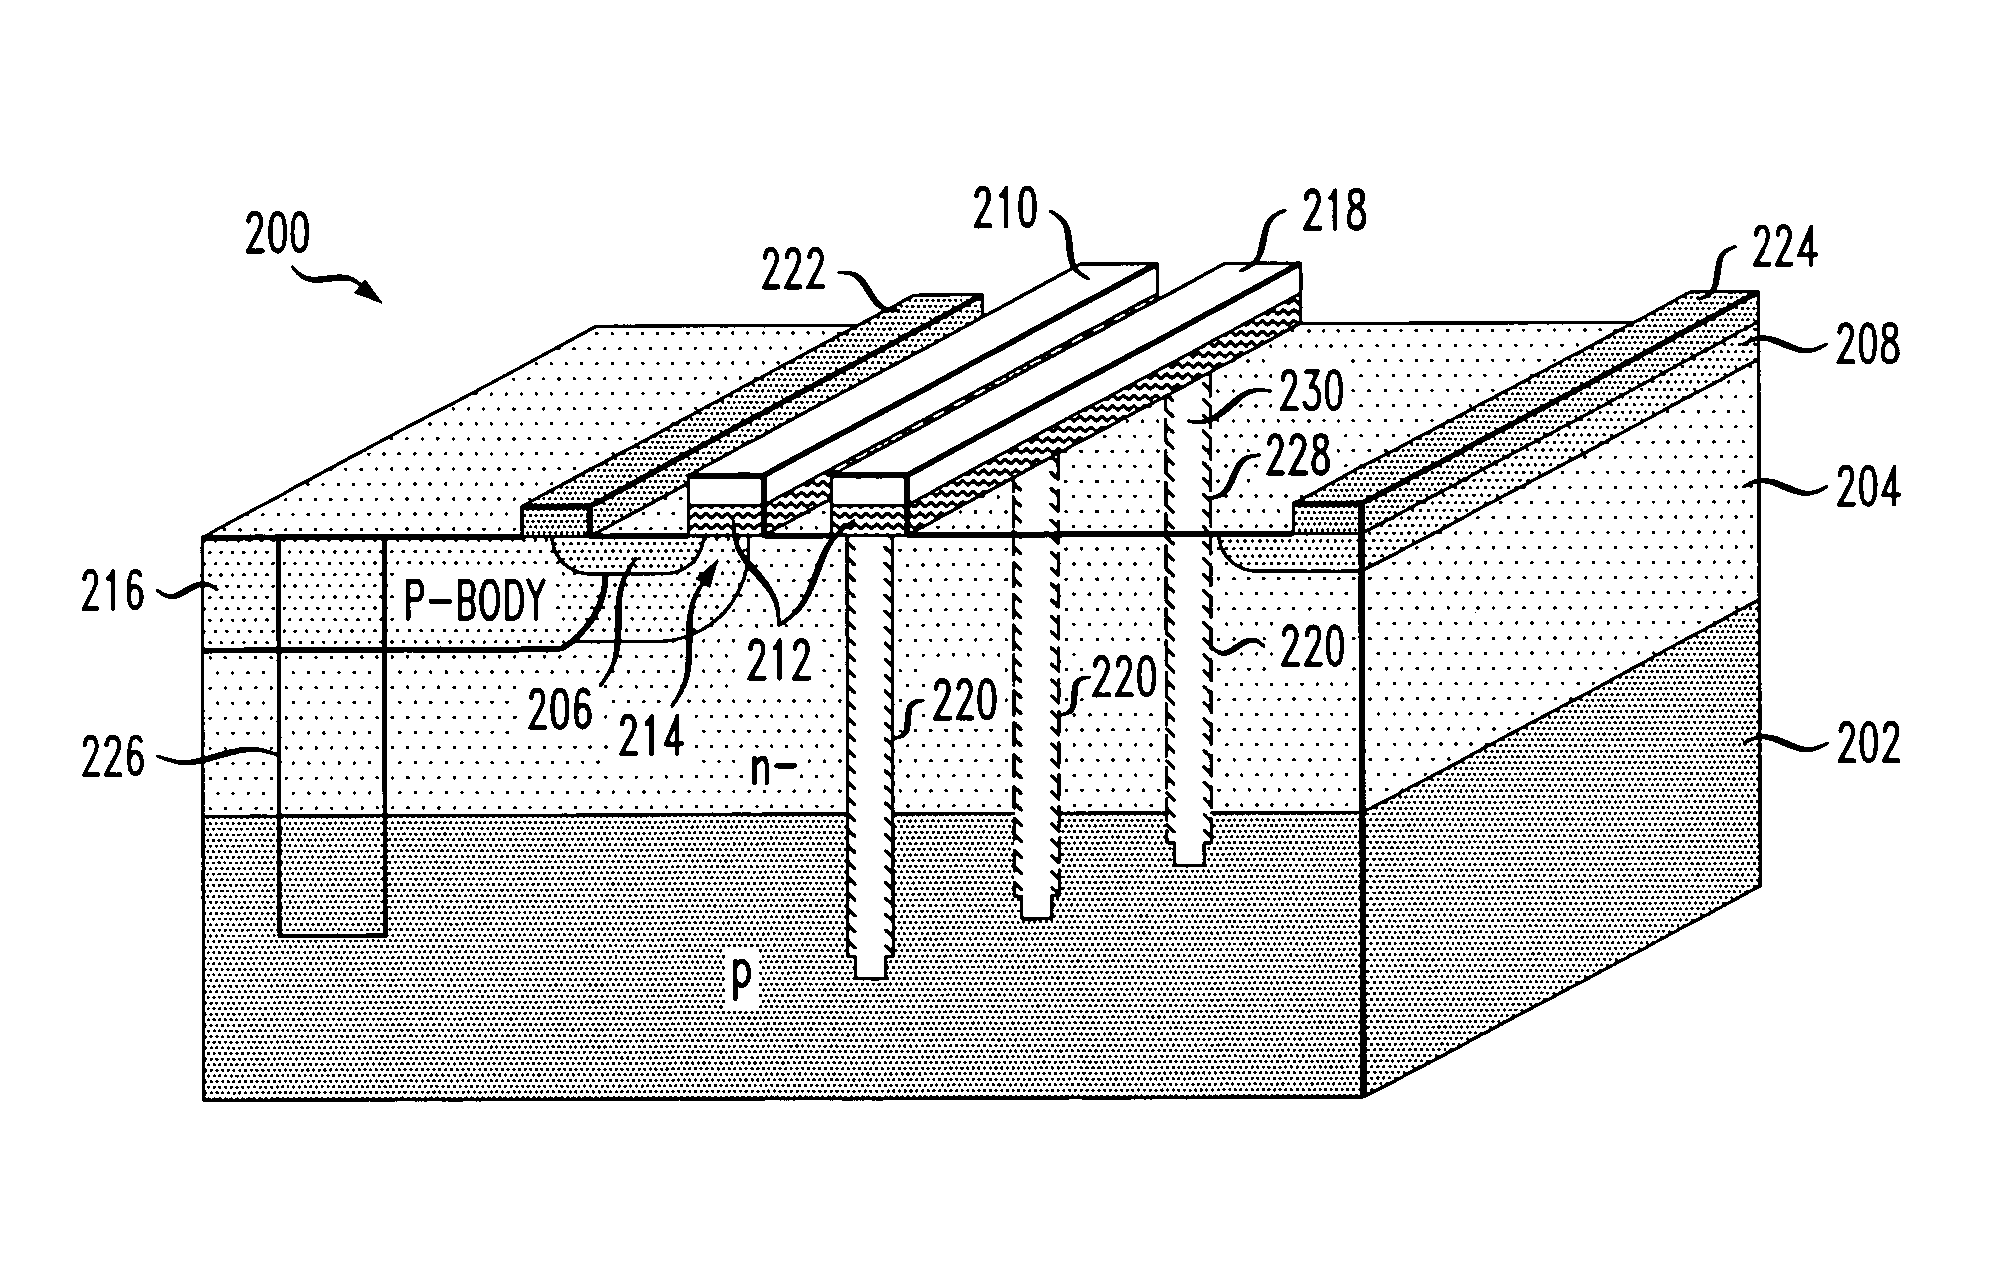 Metal-oxide-semiconductor device having improved performance and reliability